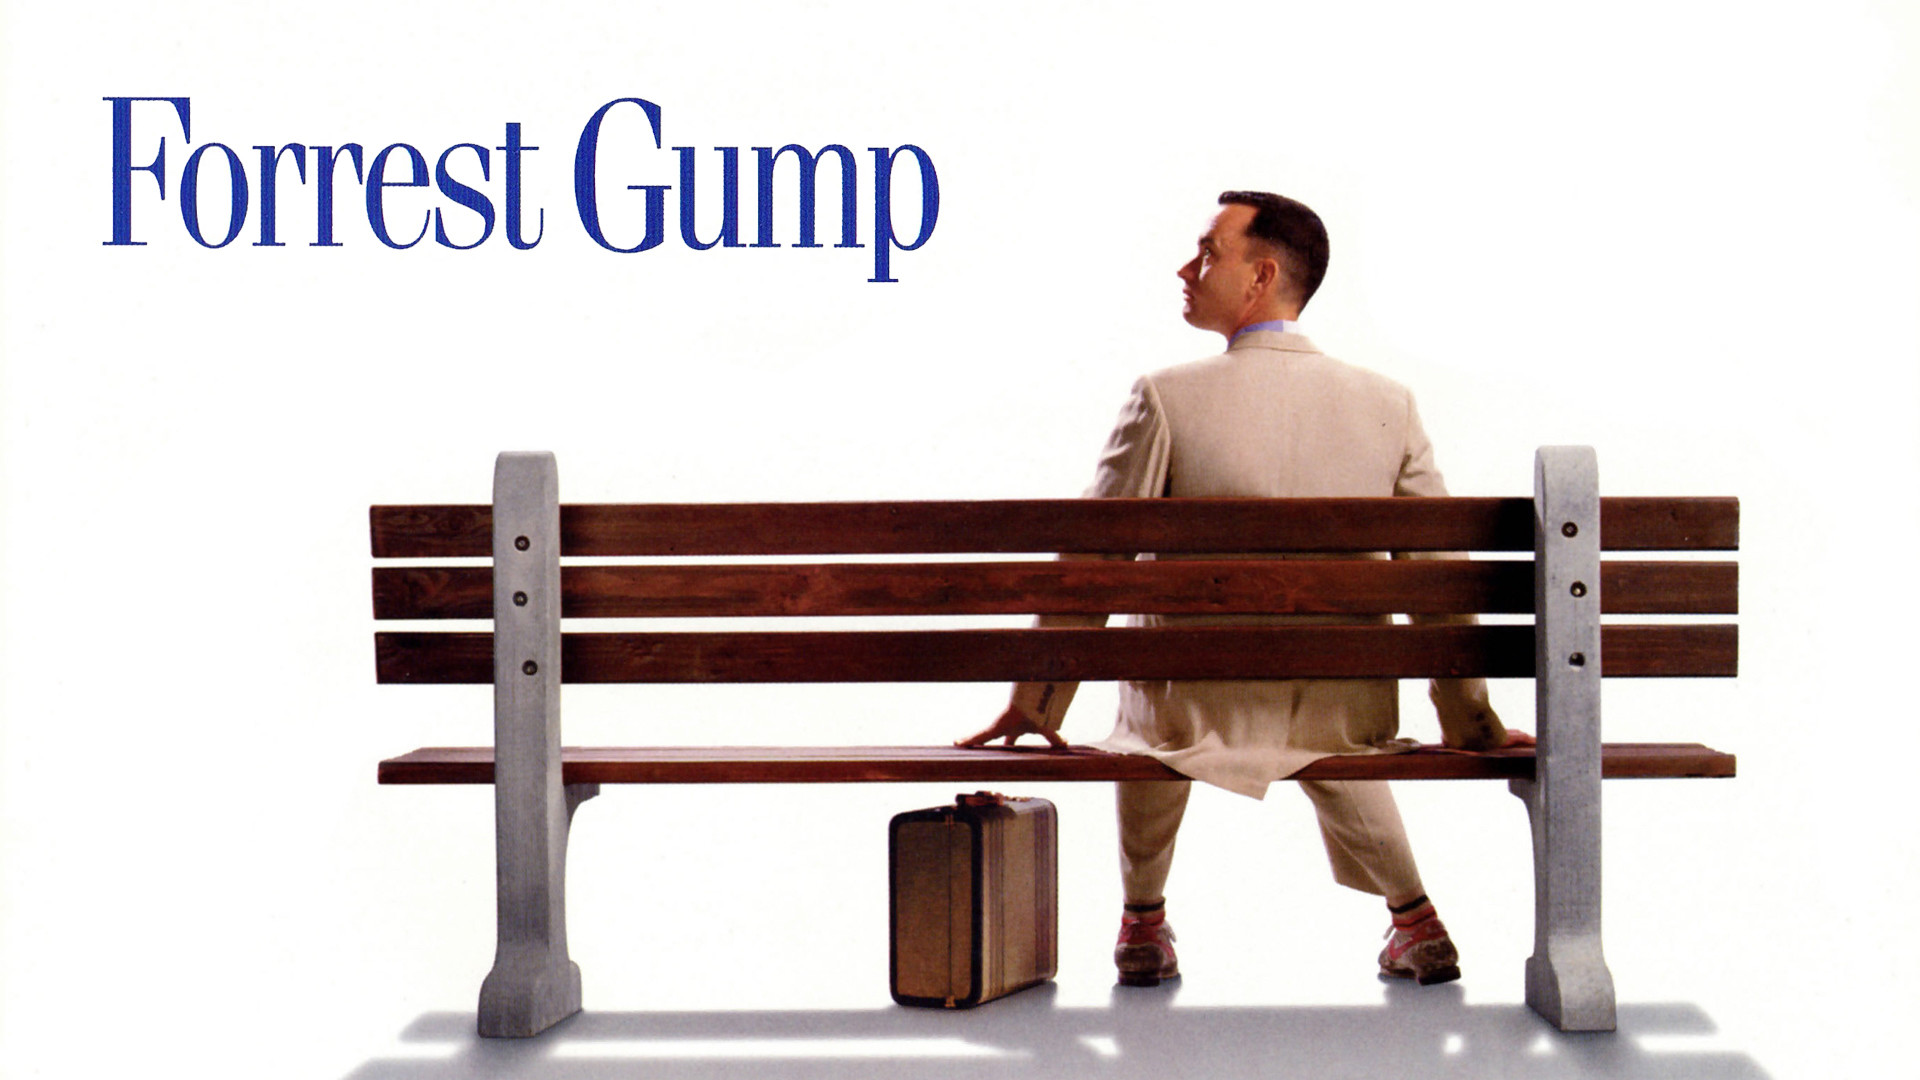 1920x1080 Why Forrest Gump Isn't That Great